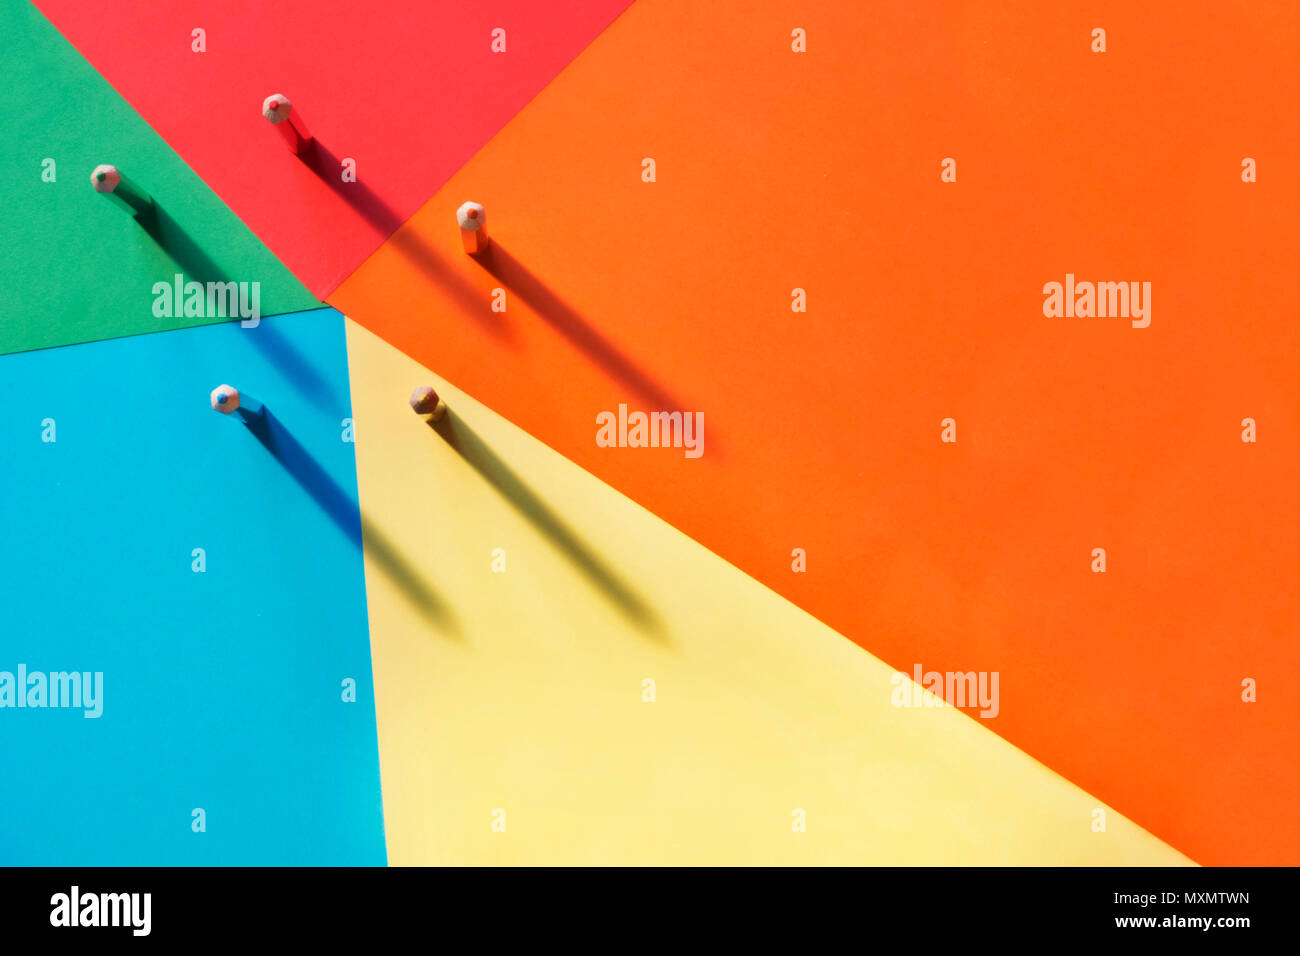 Five different colored pencils on a multicolored background, light shadow on the background .A horizontal and graphic composition,rainbow effect Stock Photo